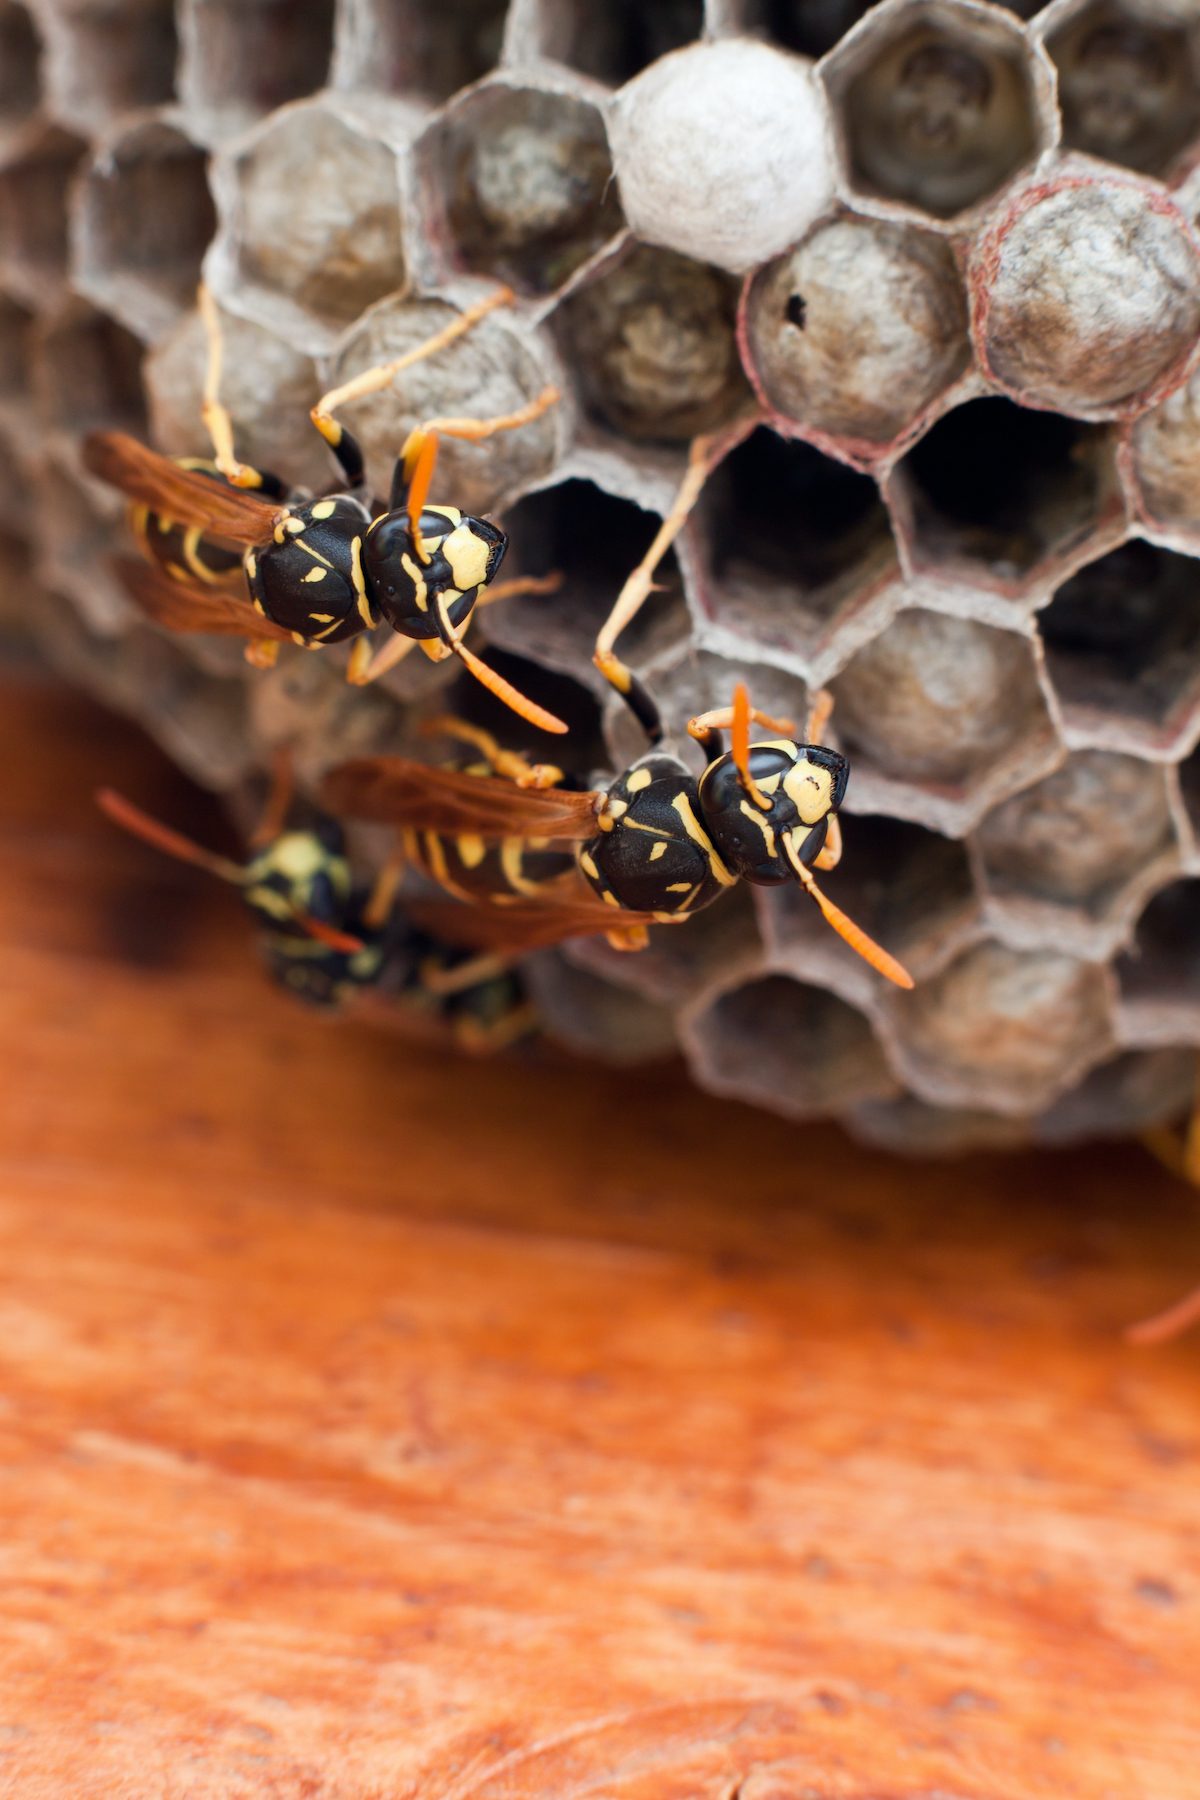 The Wonder of Wasps: Pollinators and Pest Control